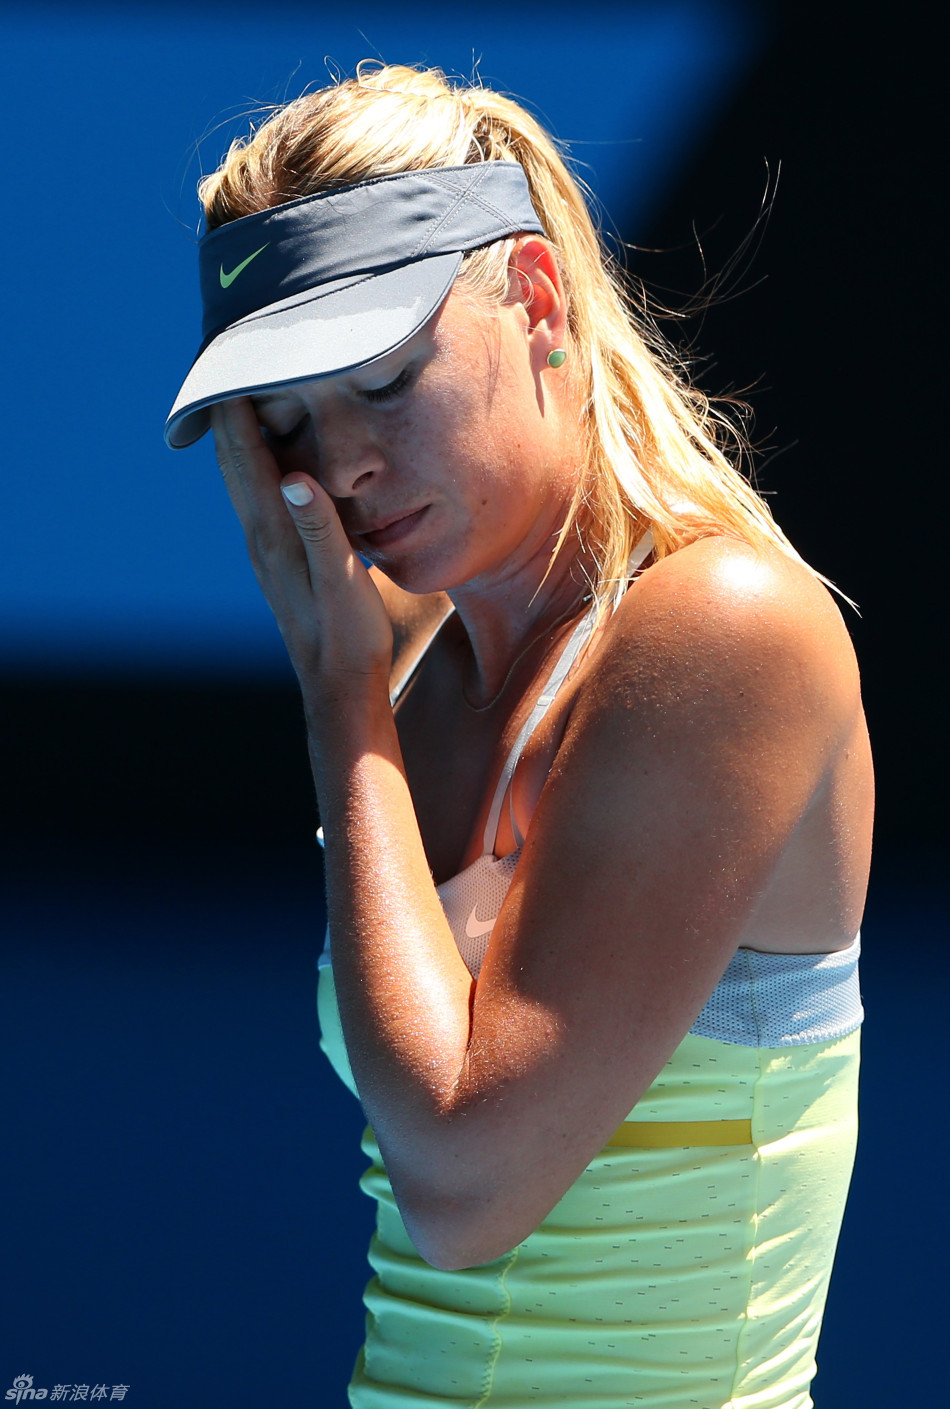 Maria Sharapova of Russia reacts in women's singles of Australian Open against Li Na of China at Rod Laver Arena on Jan.24, 2013.